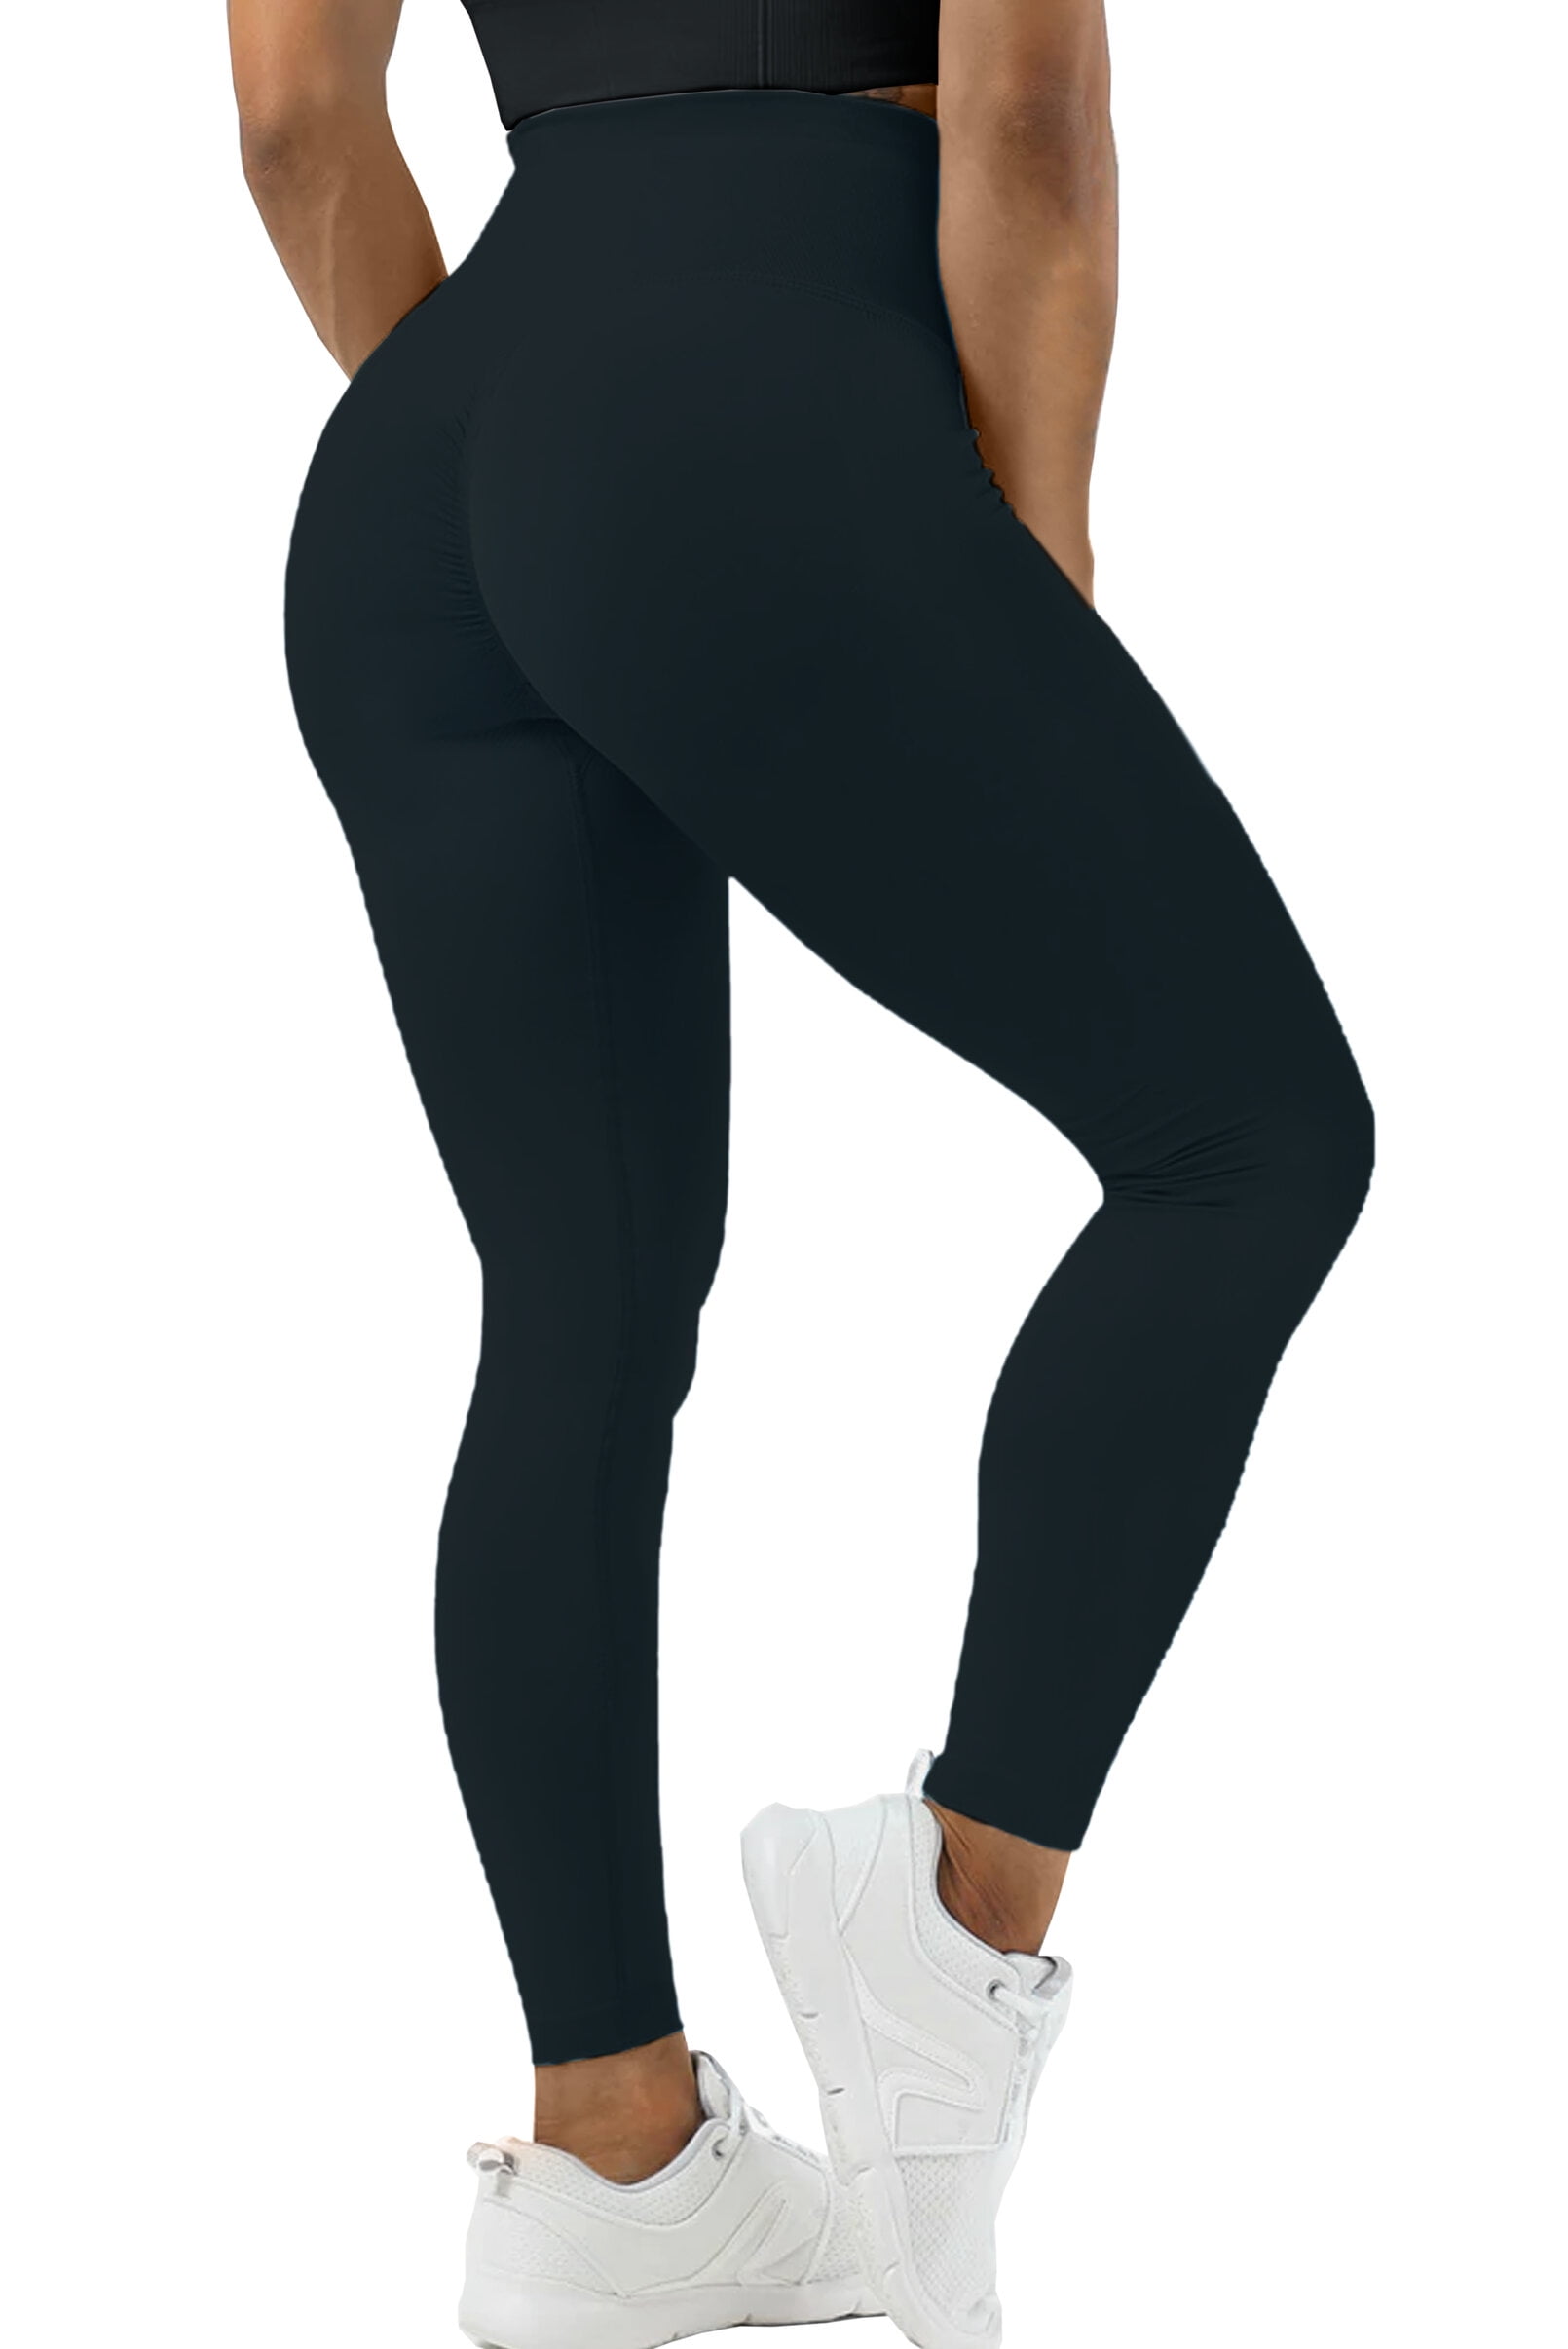 MAXXIM Womens Essentials Solids Butt Lifting High Waisted Seamless Leggings  For Gym Workouts, Yoga, Running, Exercise Black Small